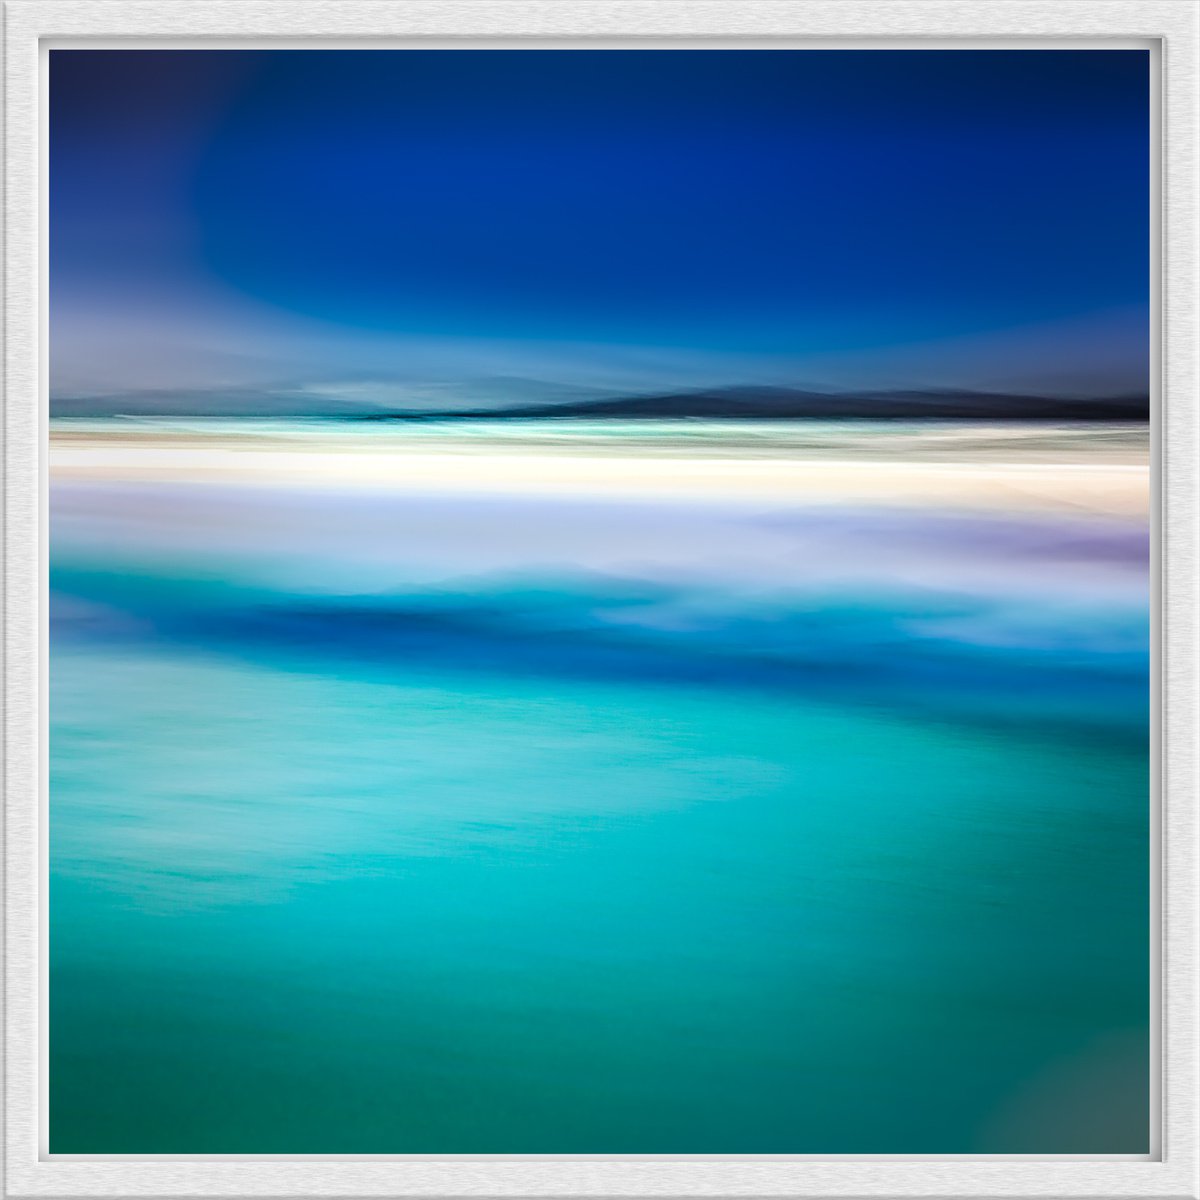 Large Teal Abstract - Colours of the Hebrides, Isle of Harris, Scotland by Lynne Douglas